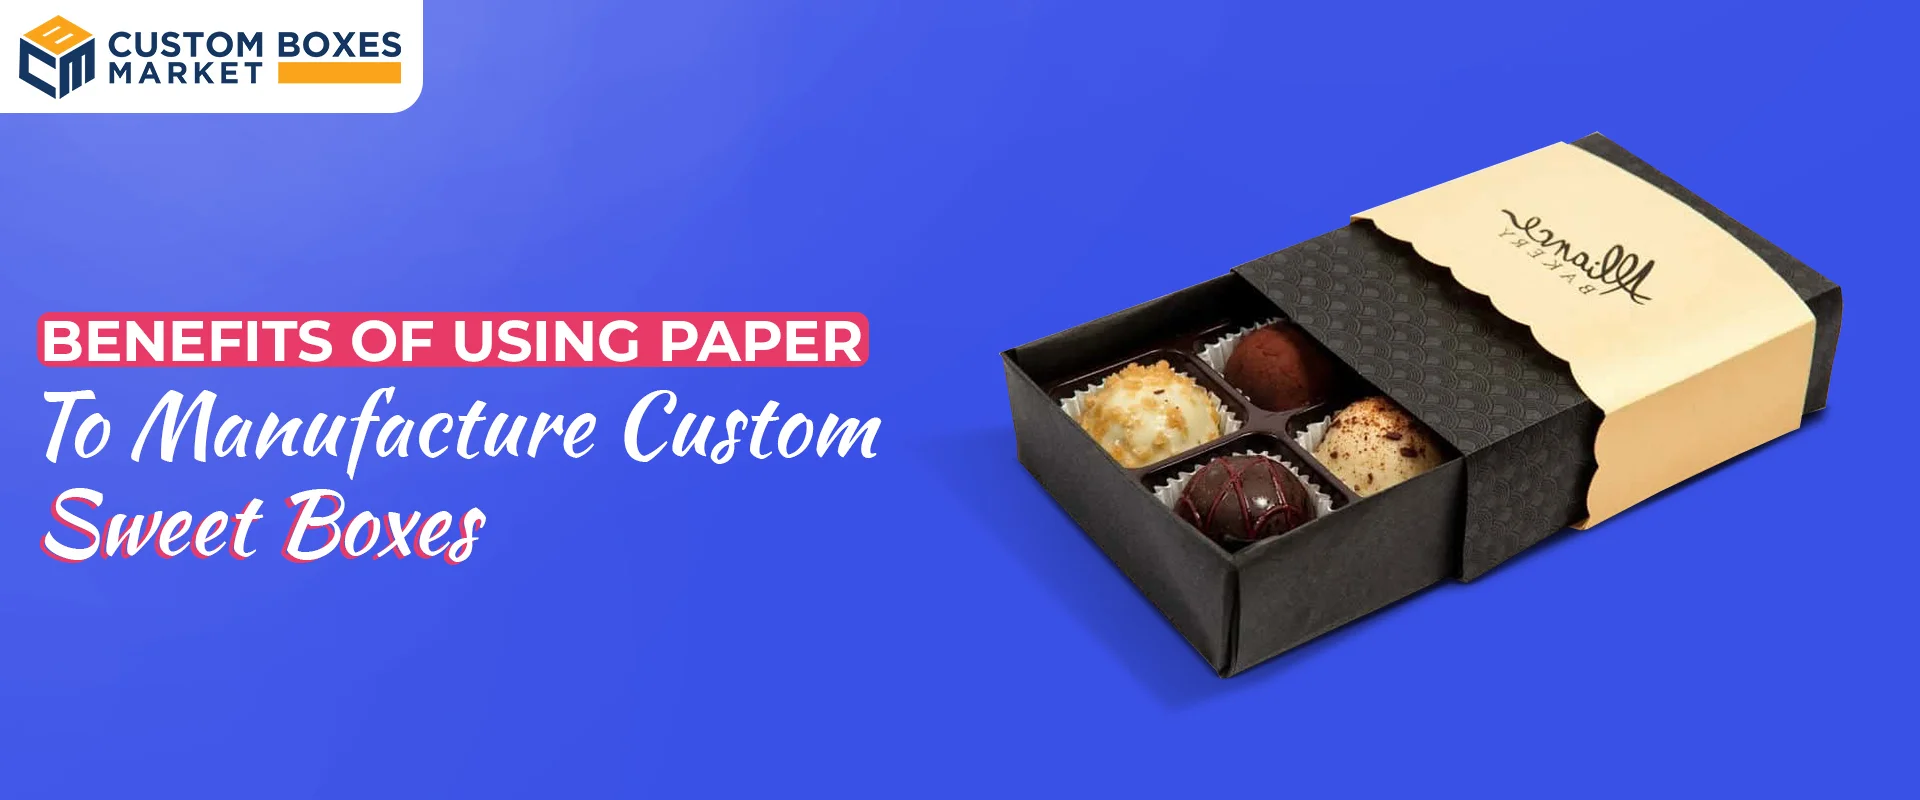 The Benefits Of Using Paper To Manufacture Custom Sweet Boxes